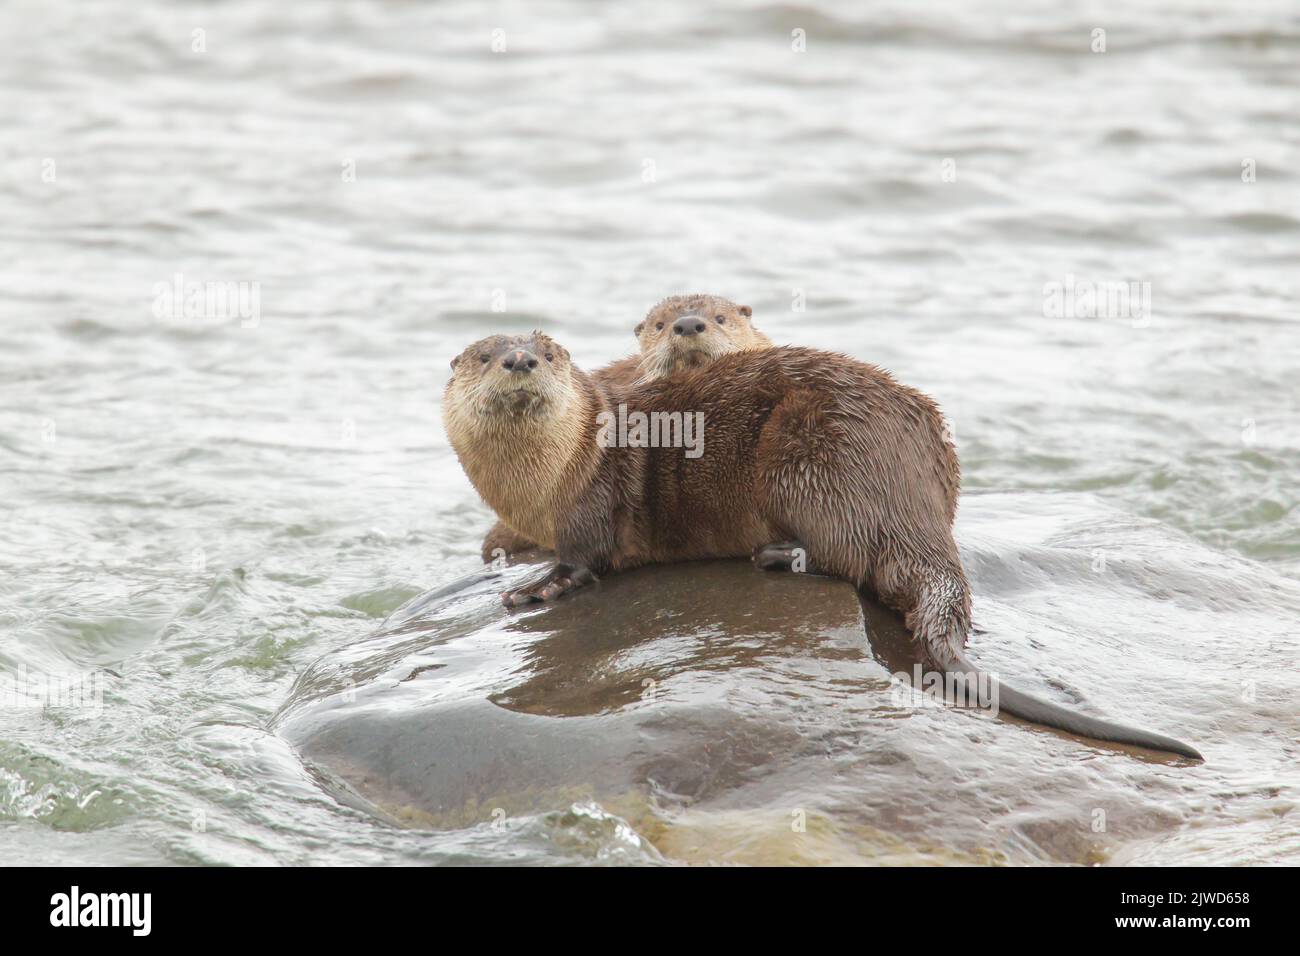 River Otters (Lontra canadensis).  Two otters on a rock in the Lamer River. Stock Photo